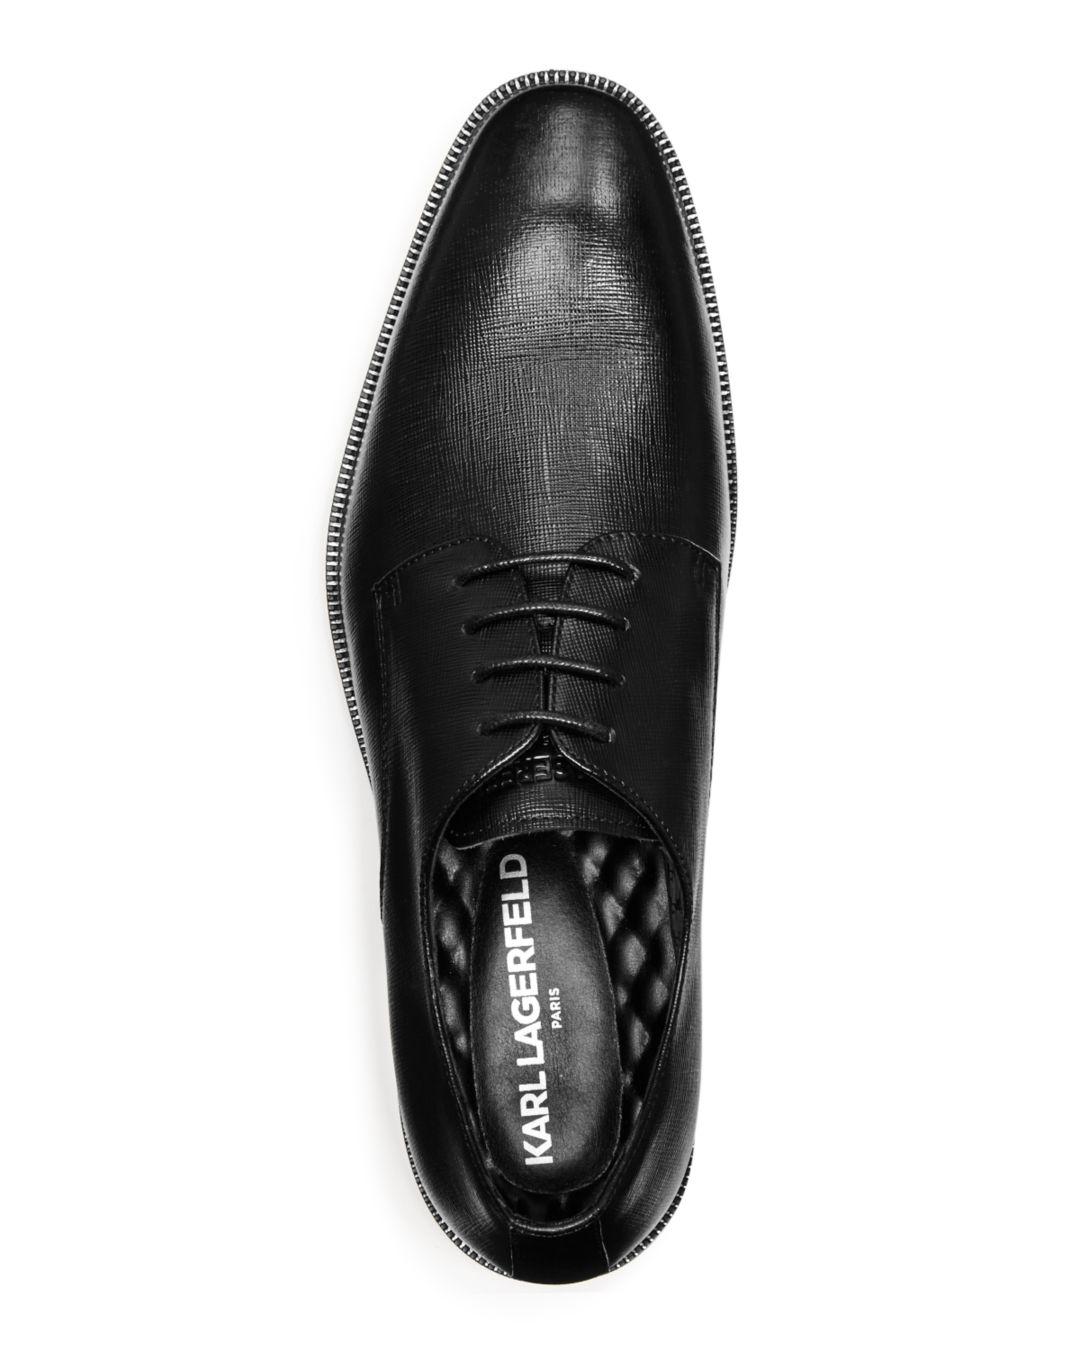 karl lagerfeld oxford shoes